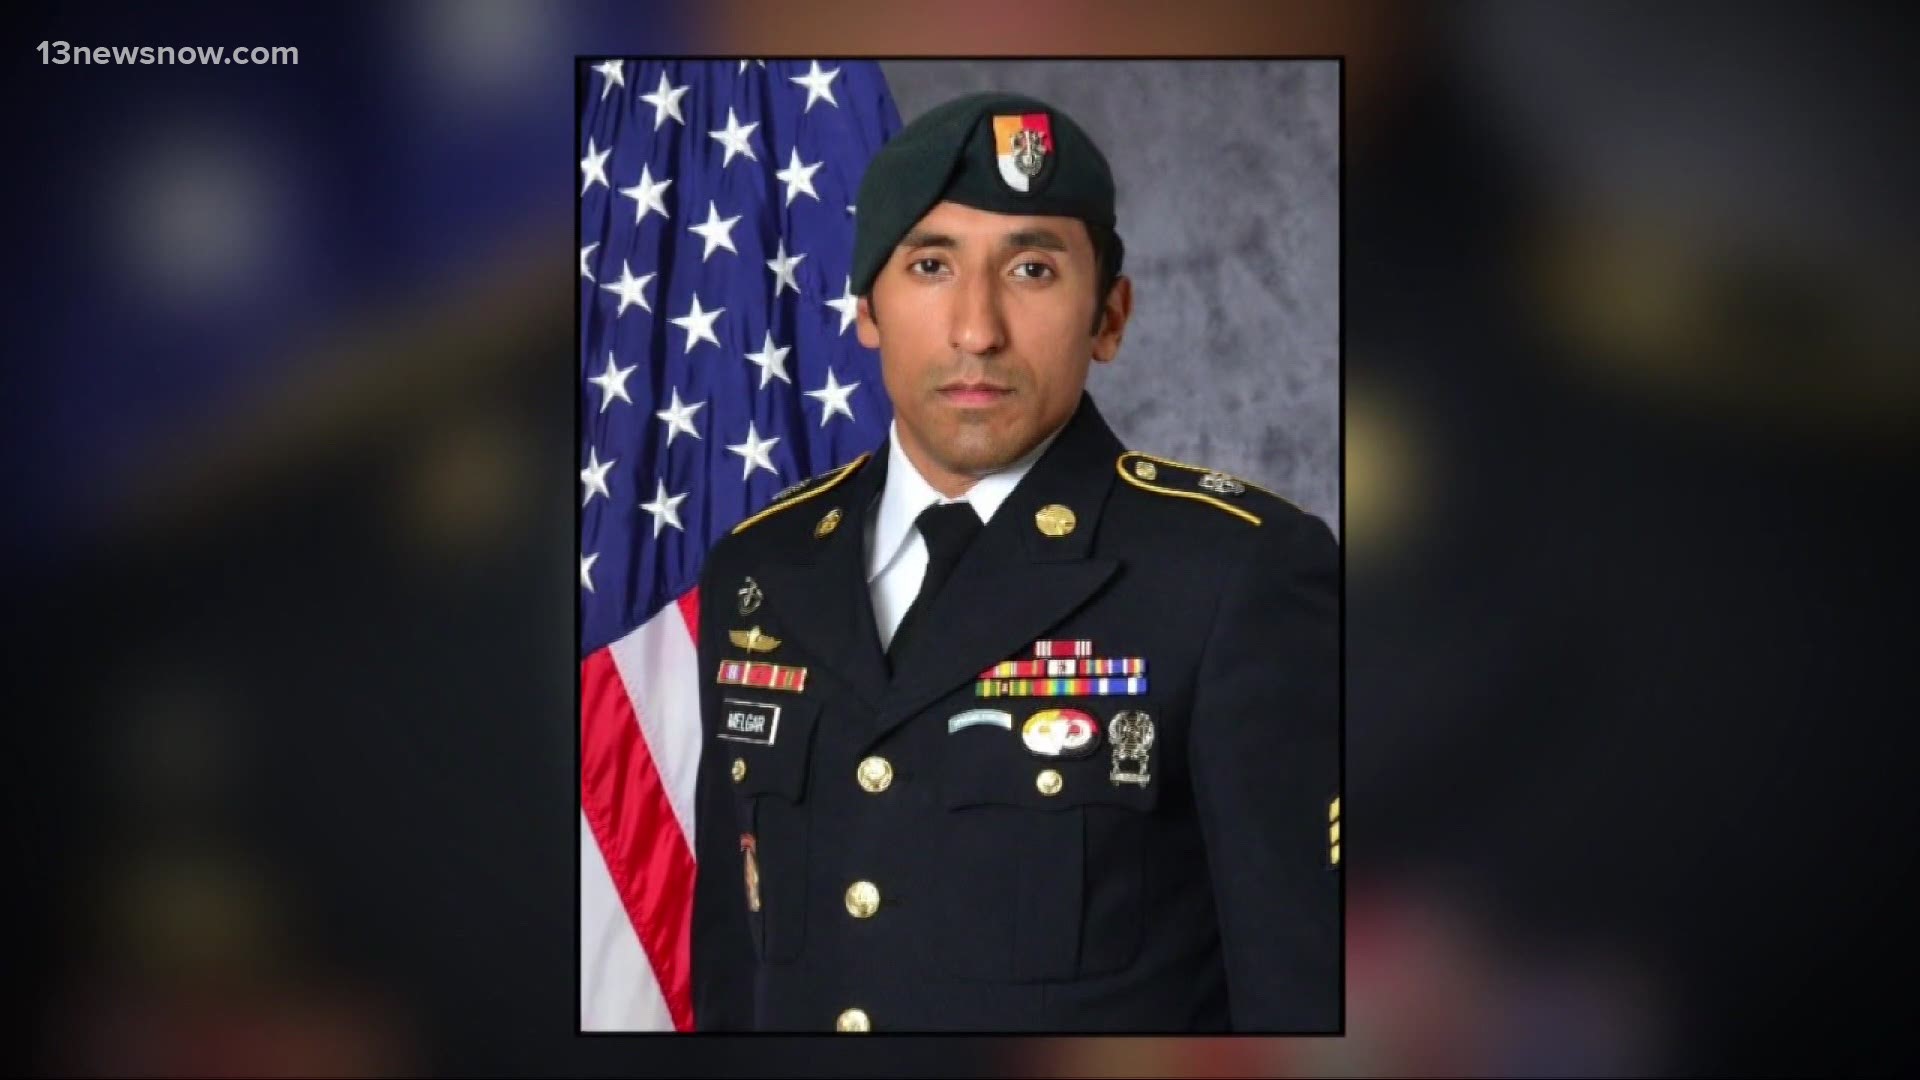 A former U.S. Marine, Mario Madera-Rodriguez, faces prison time after being found guilty of involuntary manslaughter in the death of U.S. Green Beret Logan Melgar.